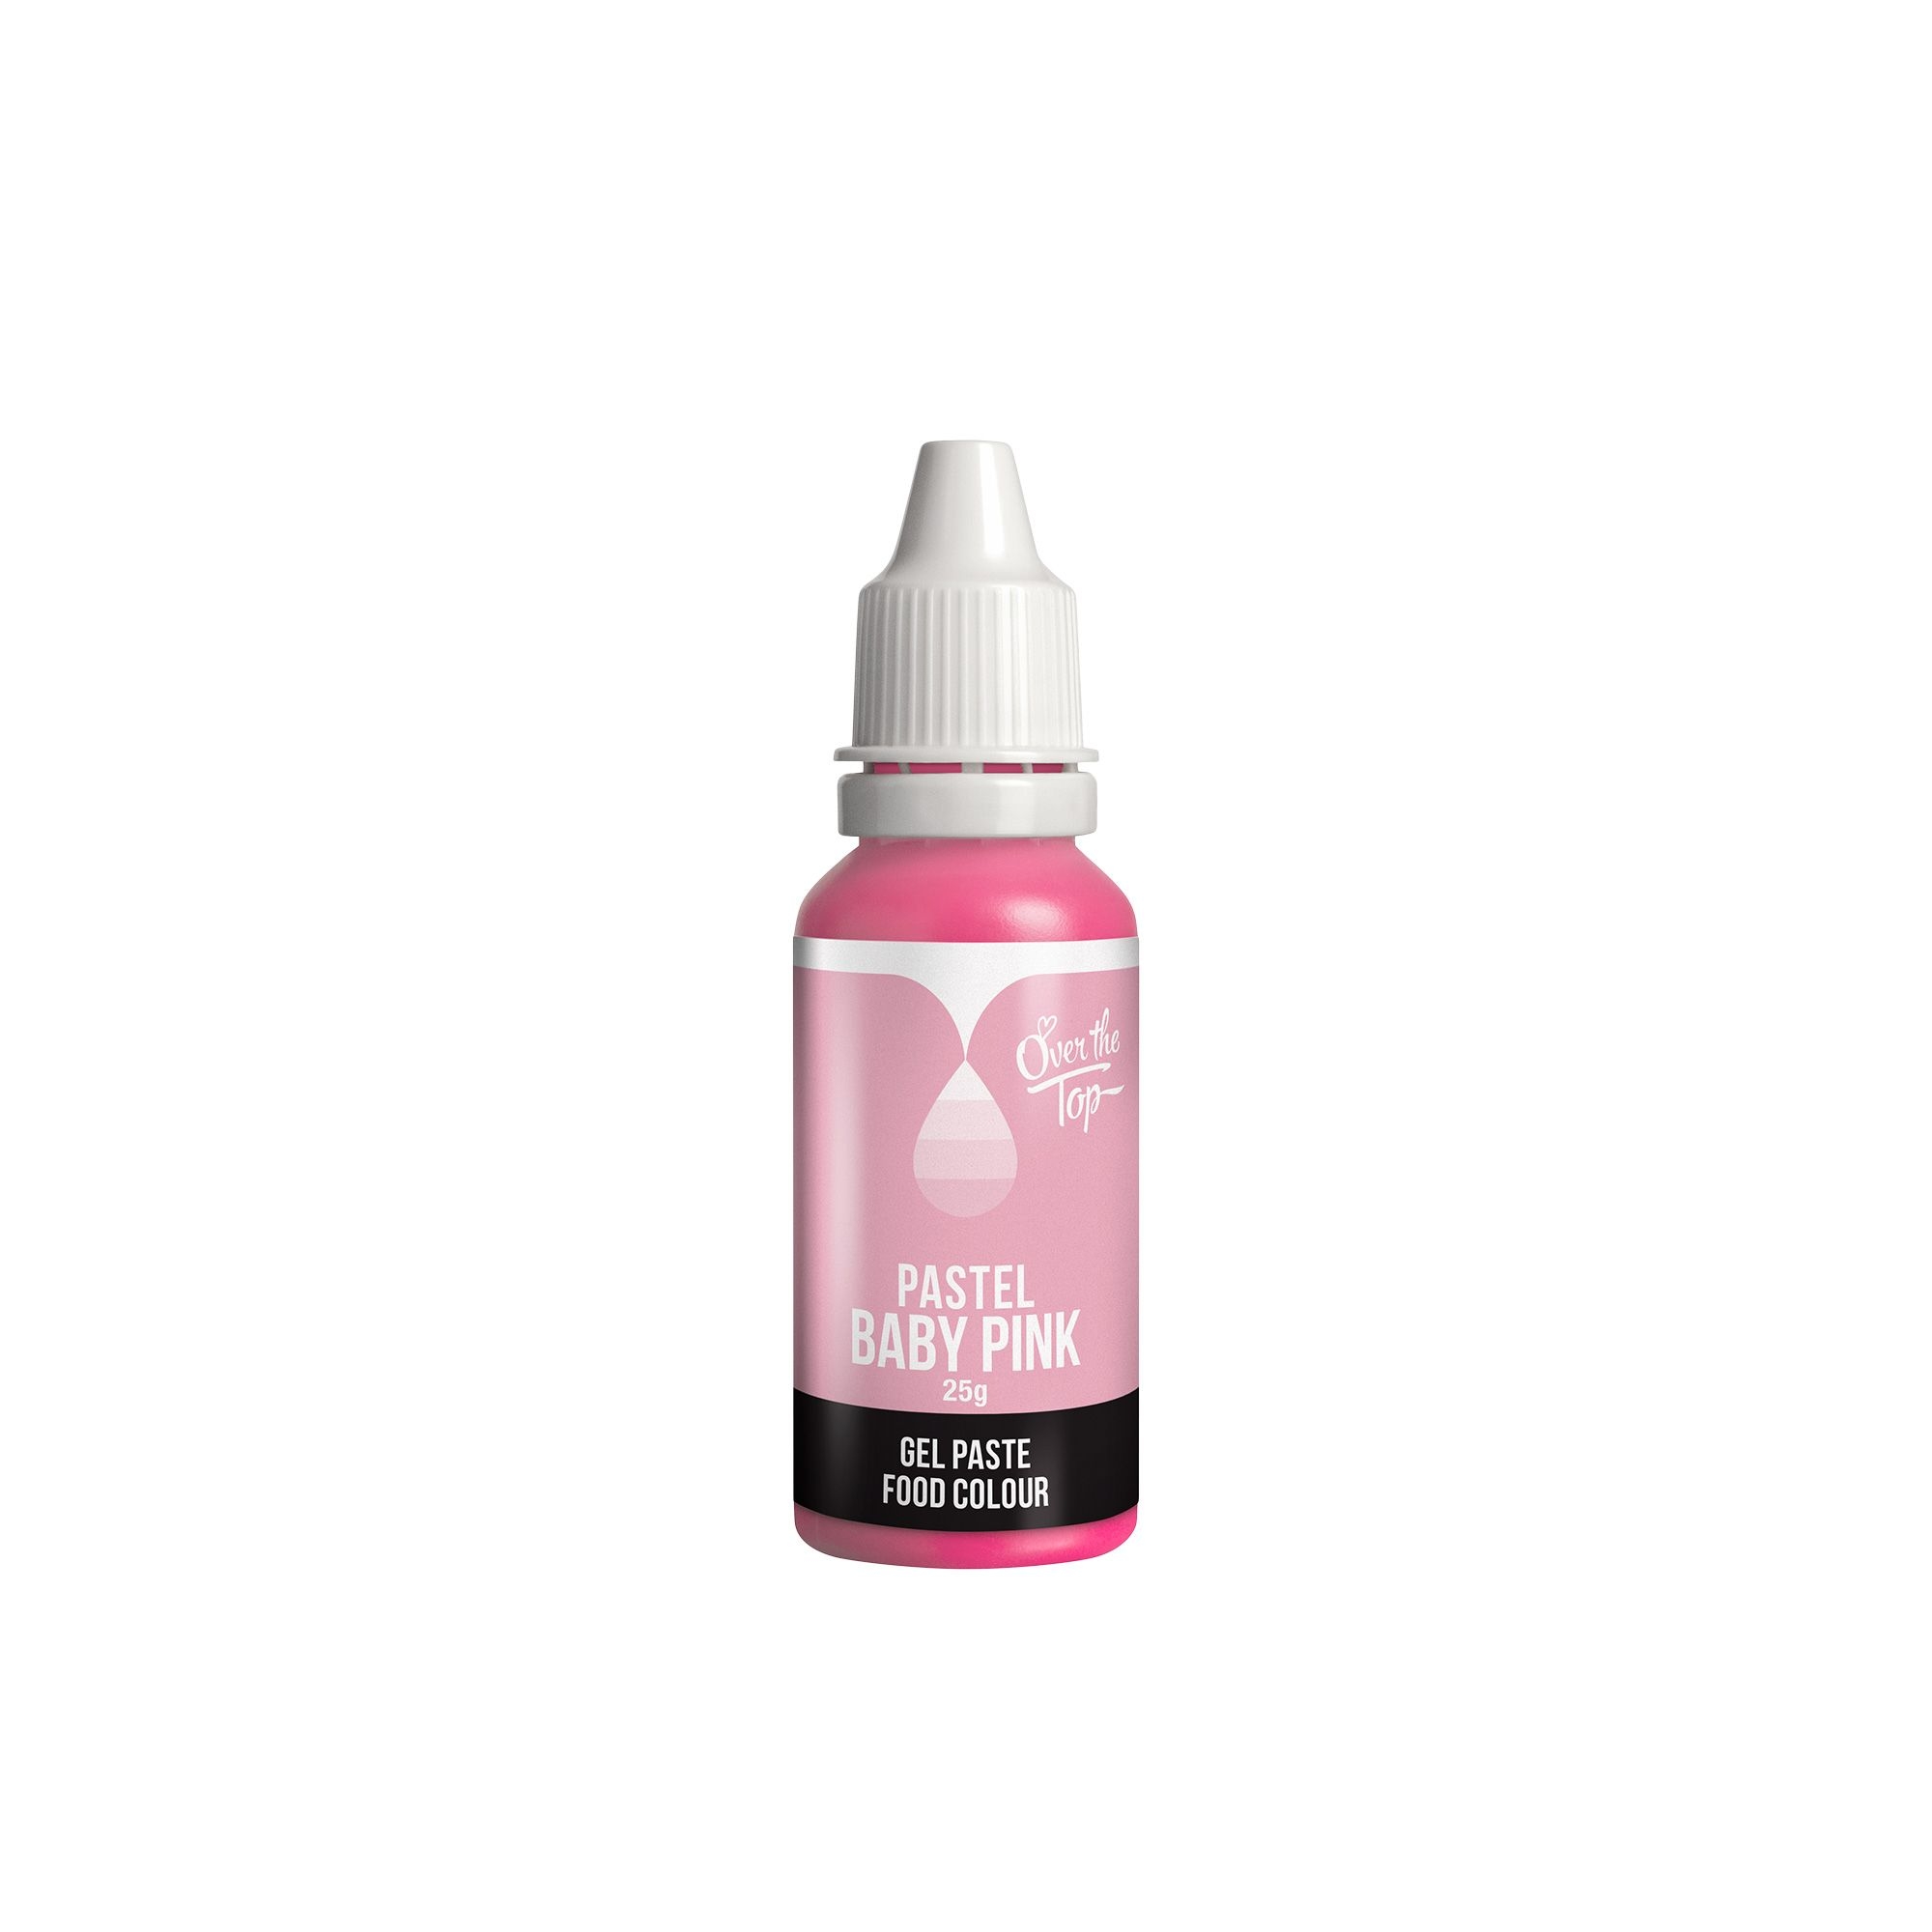 Over the Top Pastel Gel Food Colour 25ml Baby Pink Image 1